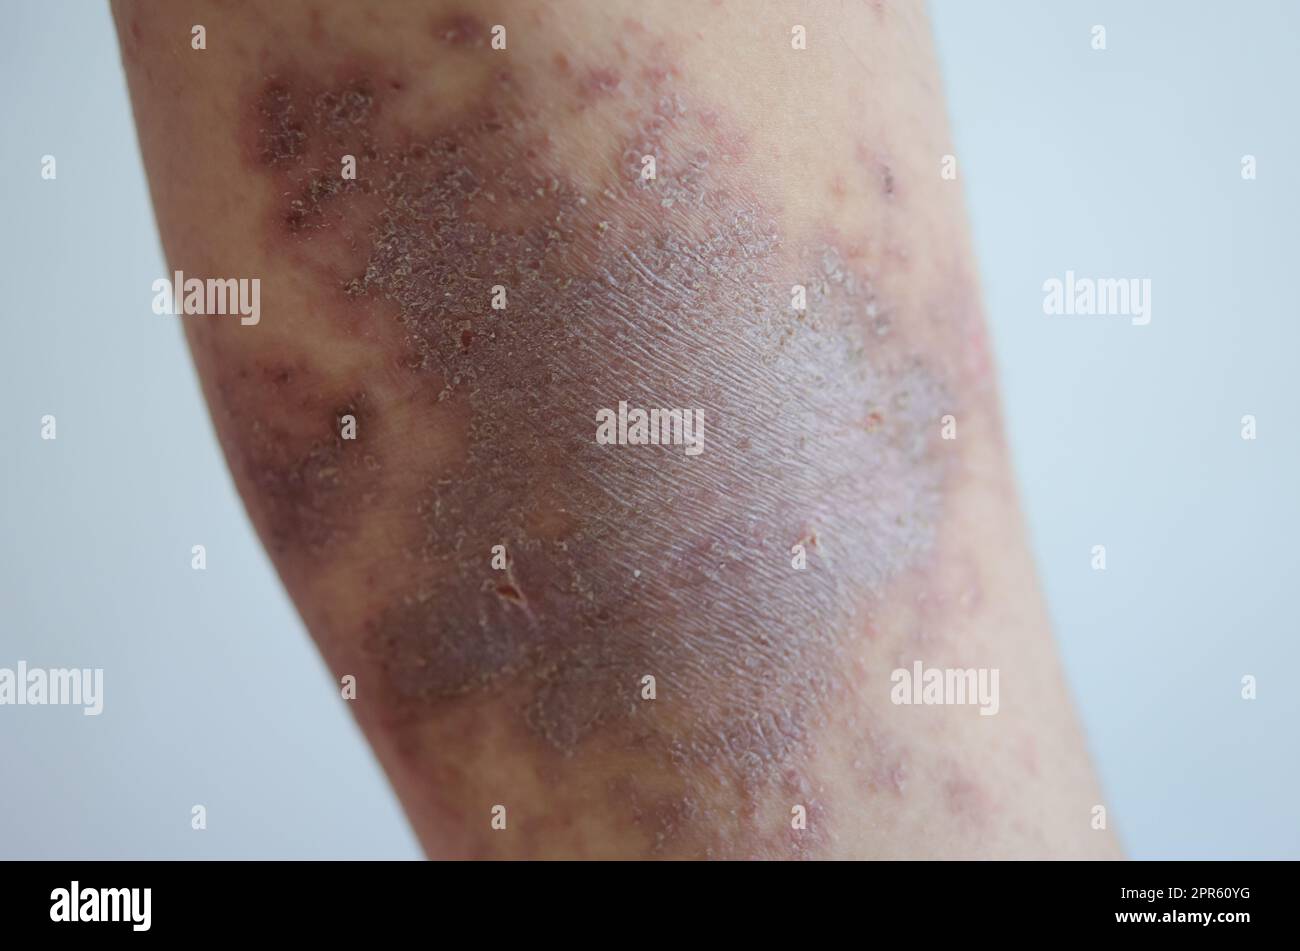 red rash girl Skin disease caused by allergies to drugs, food, chemicals, poor immune system in the lymph. Stock Photo